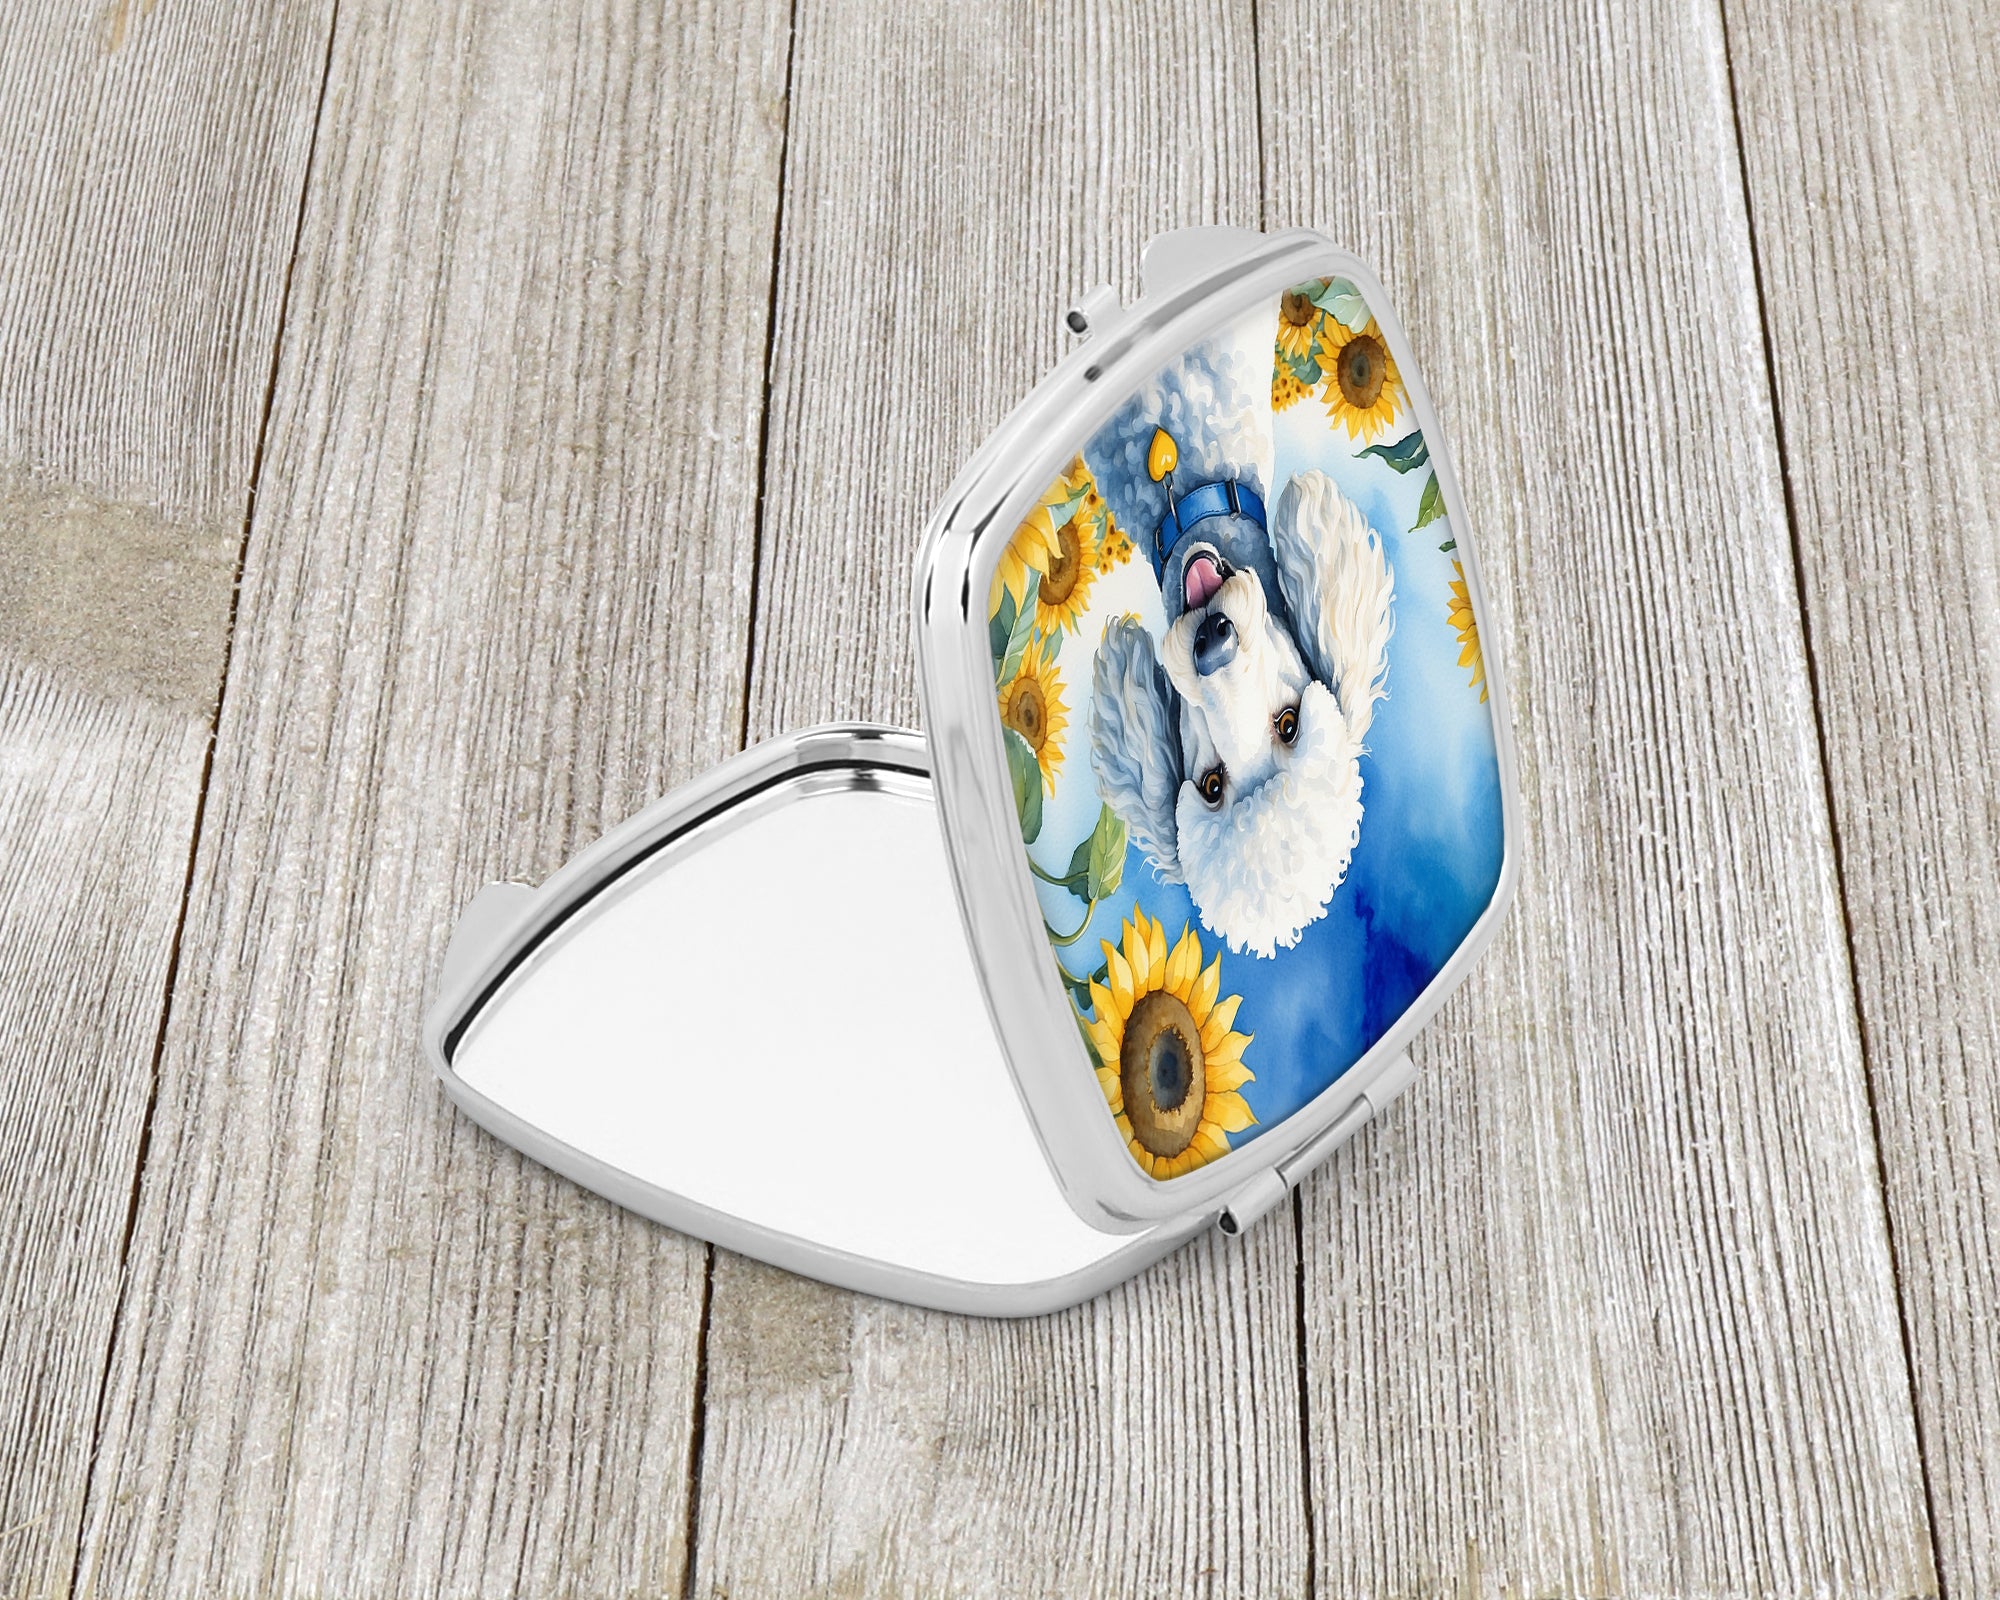 Buy this White Poodle in Sunflowers Compact Mirror